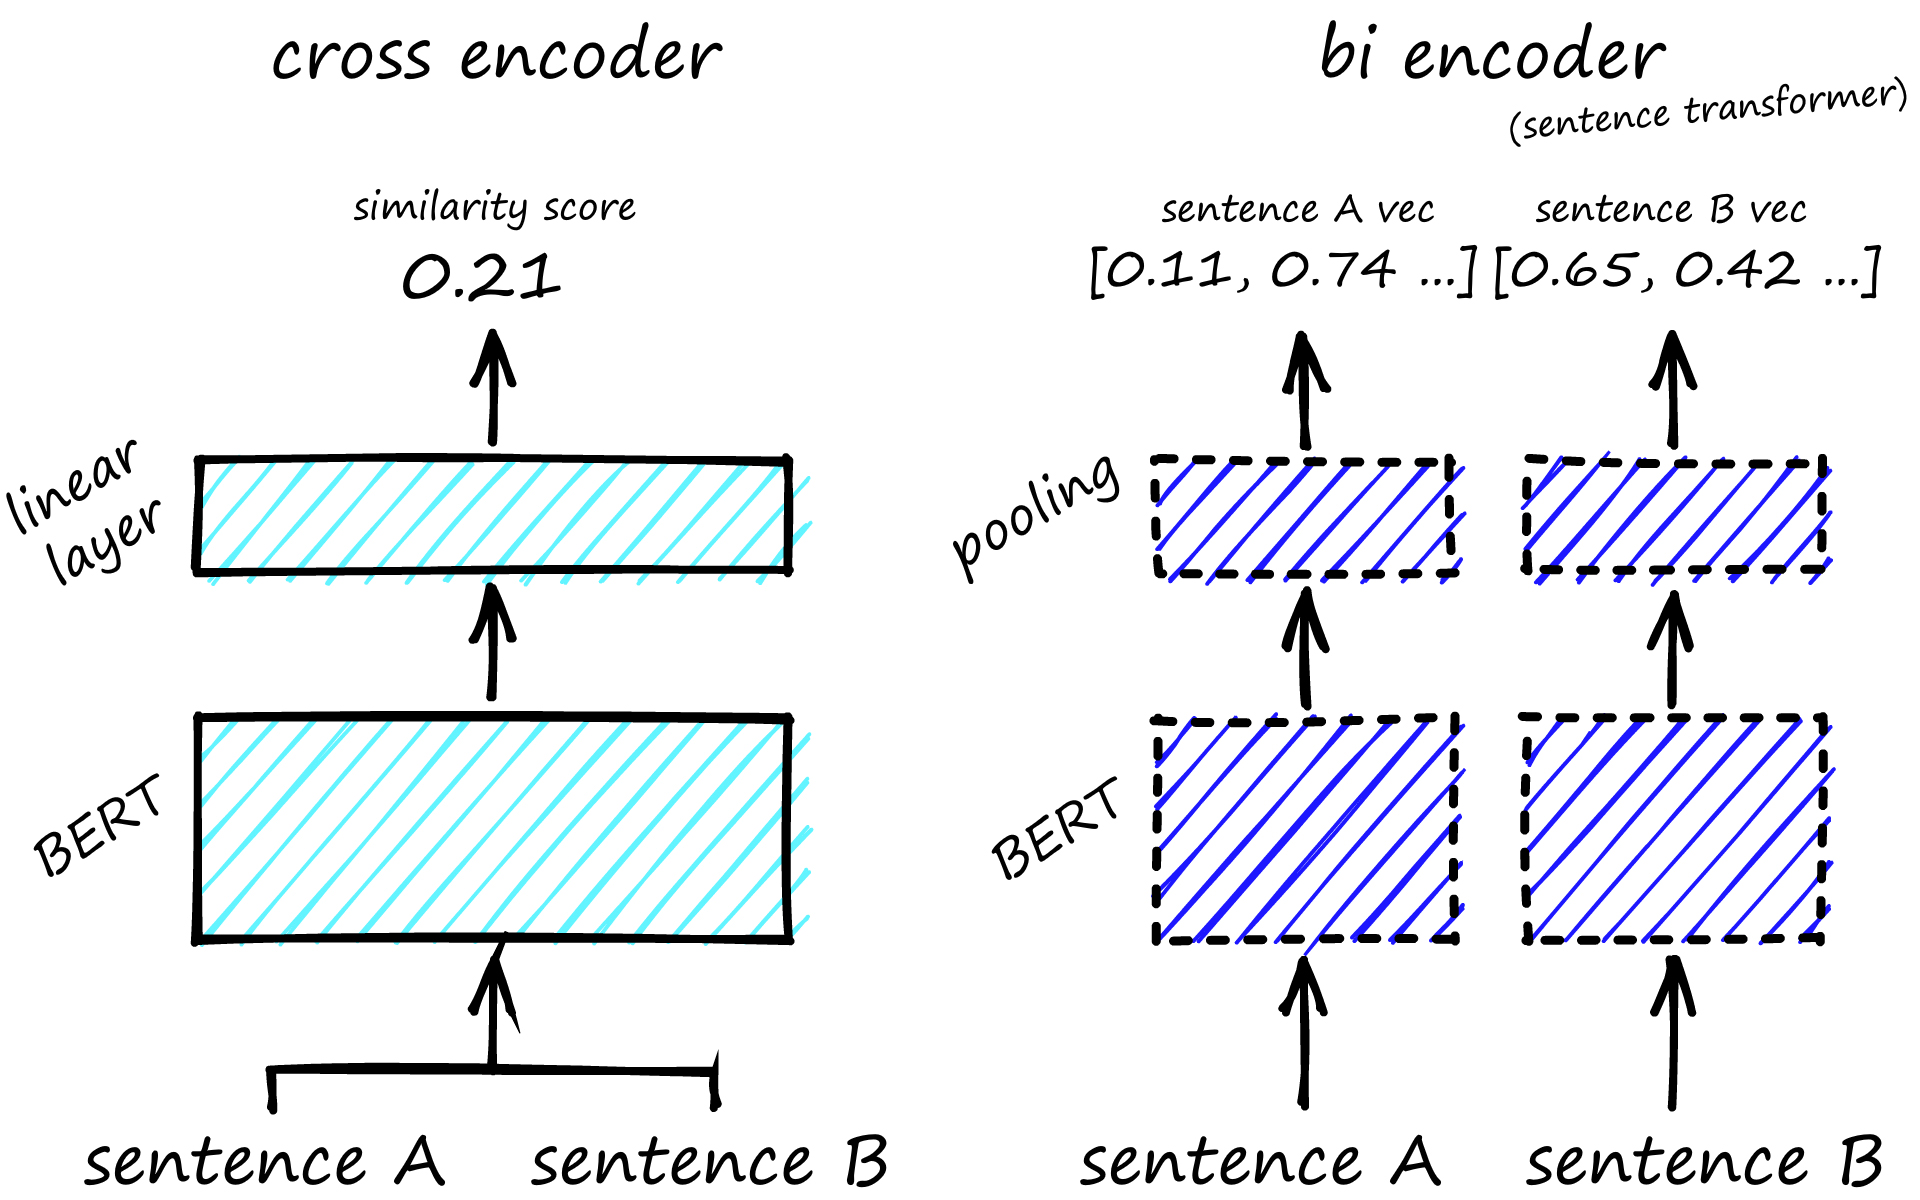 A cross-encoder (left) is a single BERT inference step that takes both sentences as a single input and outputs a similarity score. Bi-encoders (right) perform an inference step for each sentence and output sentence vectors.